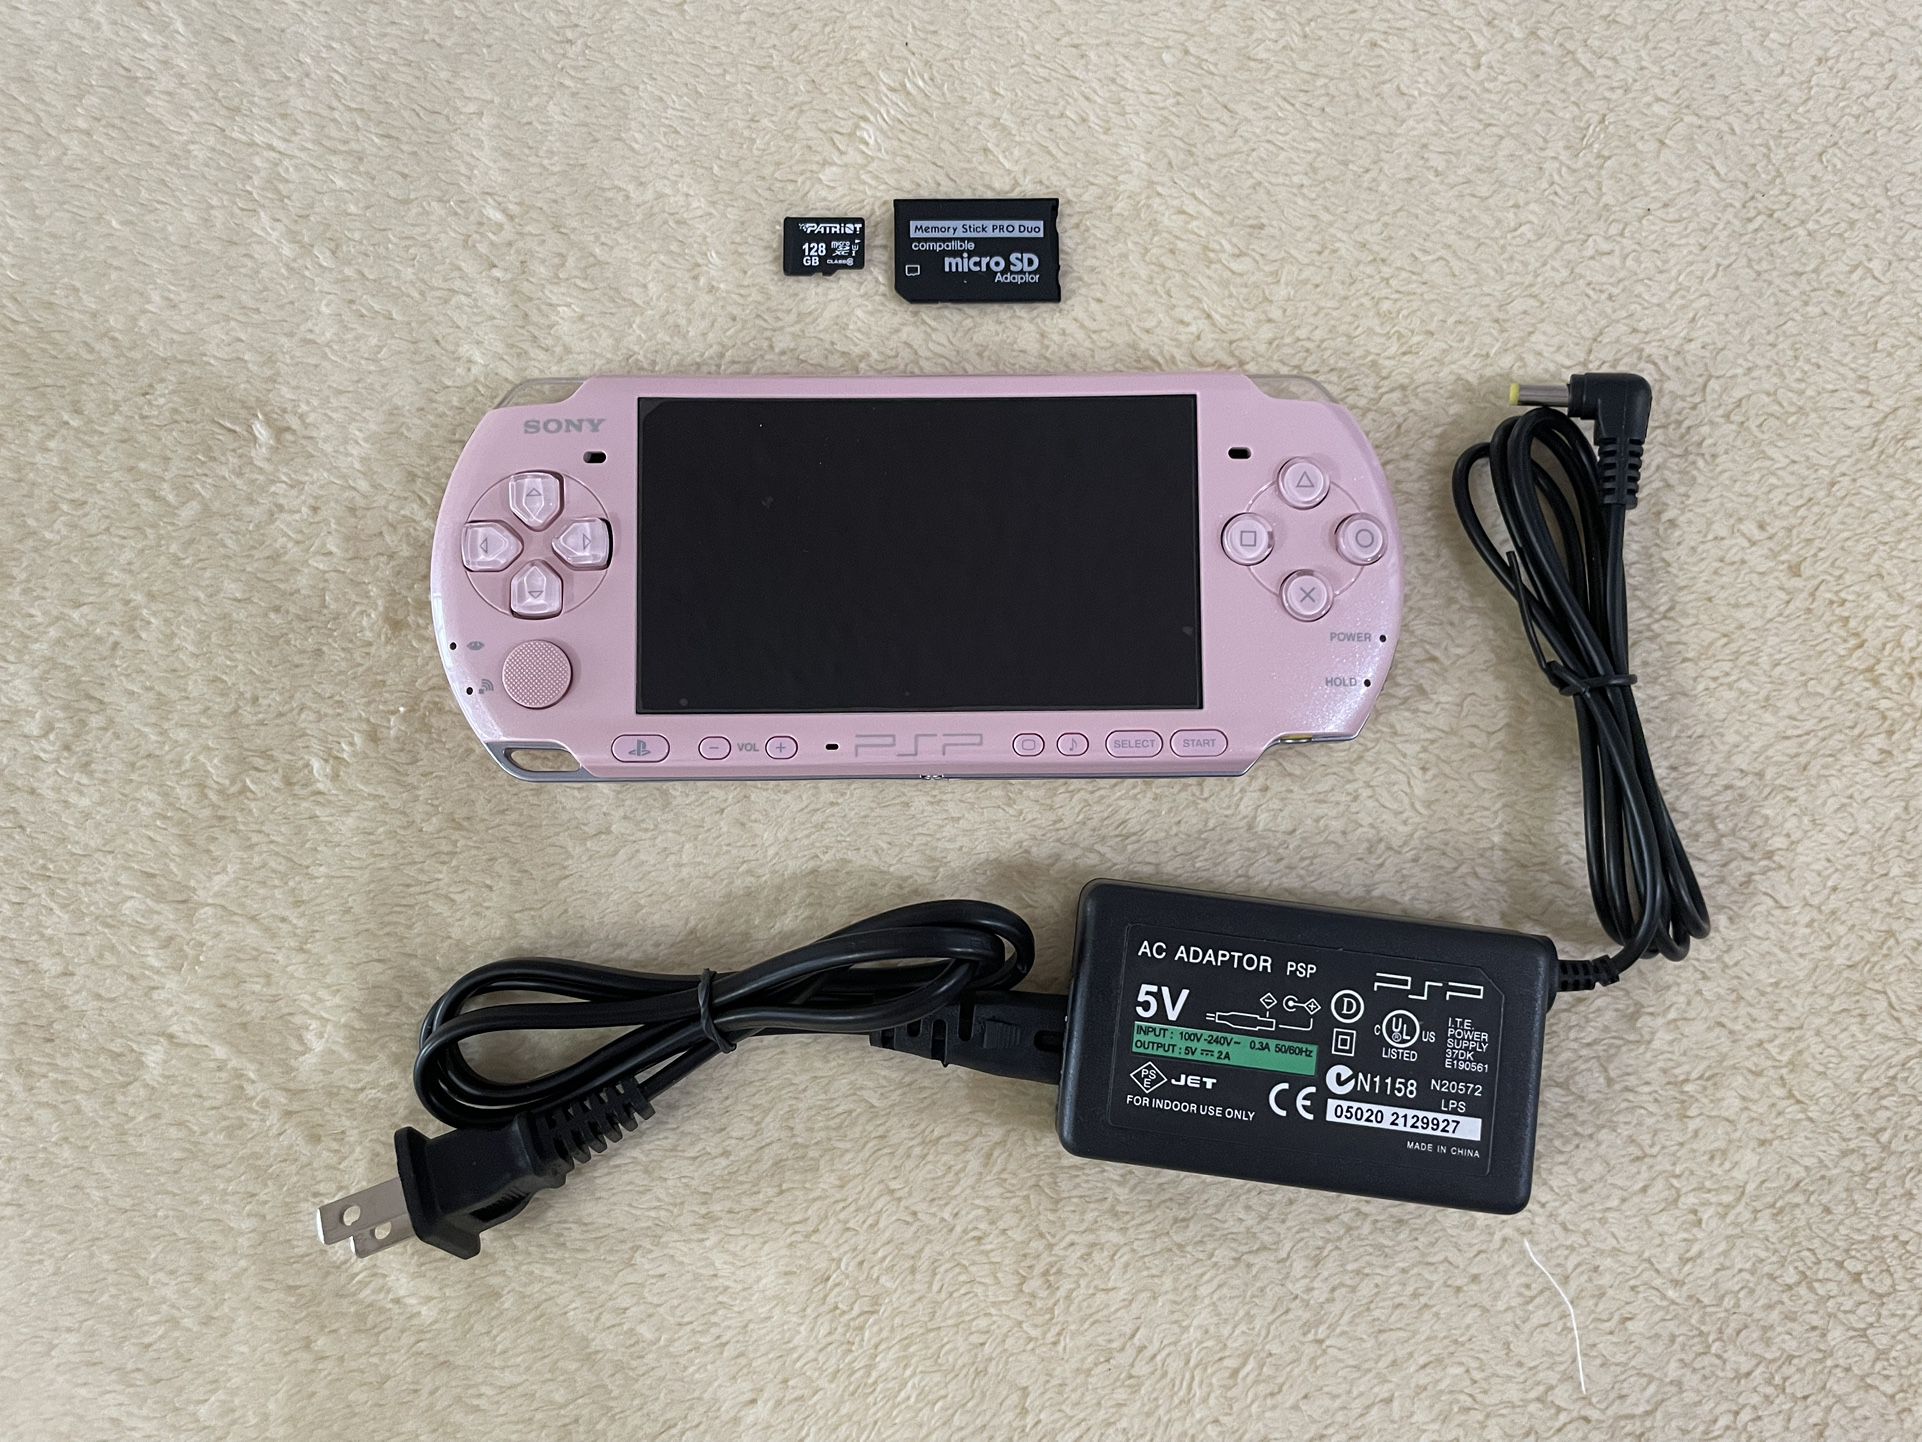 Sony PlayStation Portable Psp 3000 Pink w/ 7000+ Games Saved